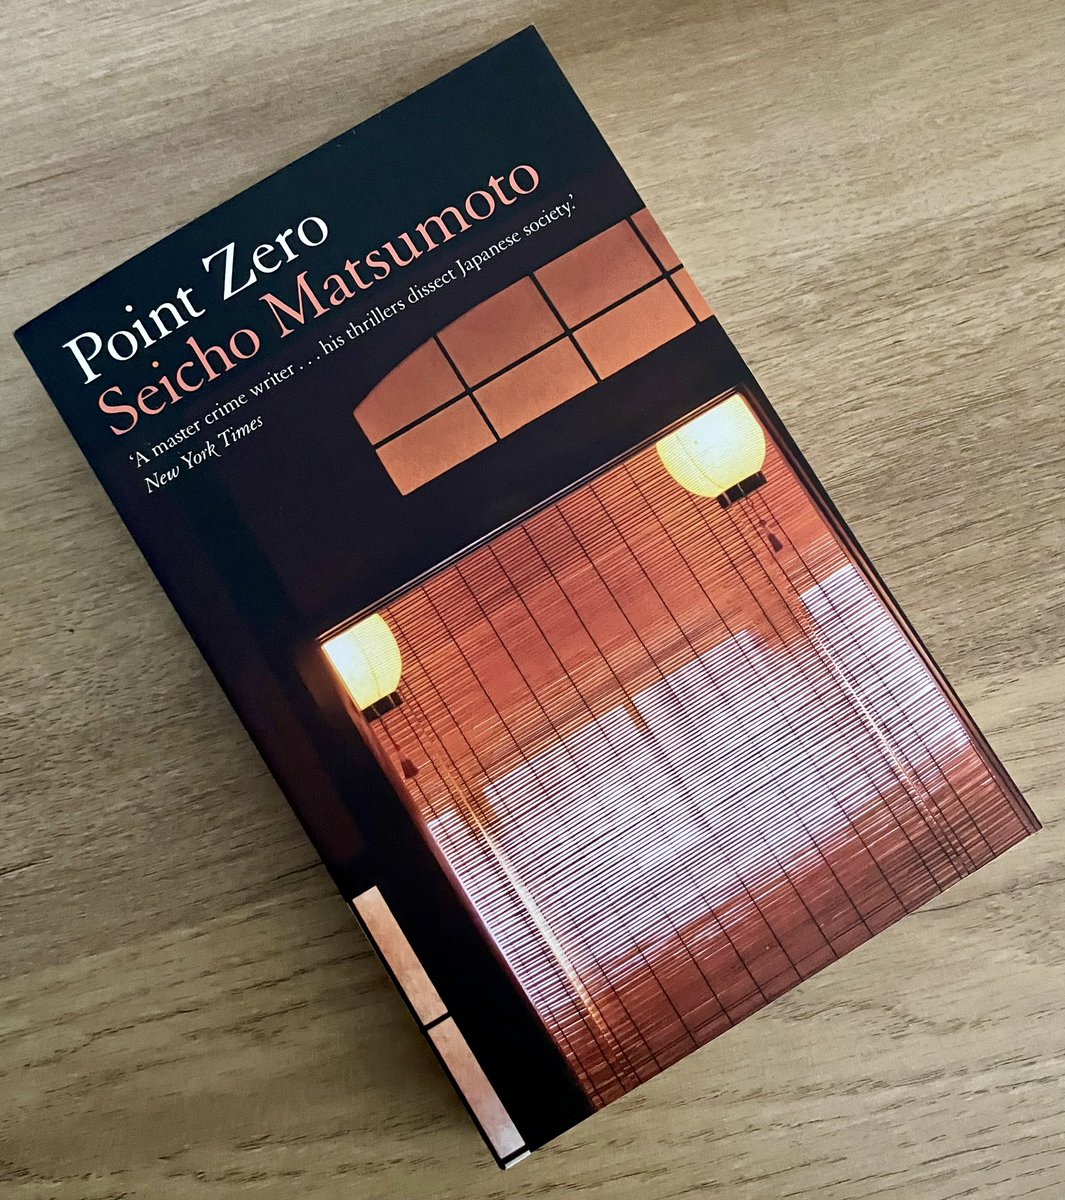 And HUGE thank you also to @bitterlemonpub for this copy of #PointZero by #SeichoMatsumoto. I’m looking forward to being part of the @RandomTTours #BlogTour for this Japanese crime thriller in February.